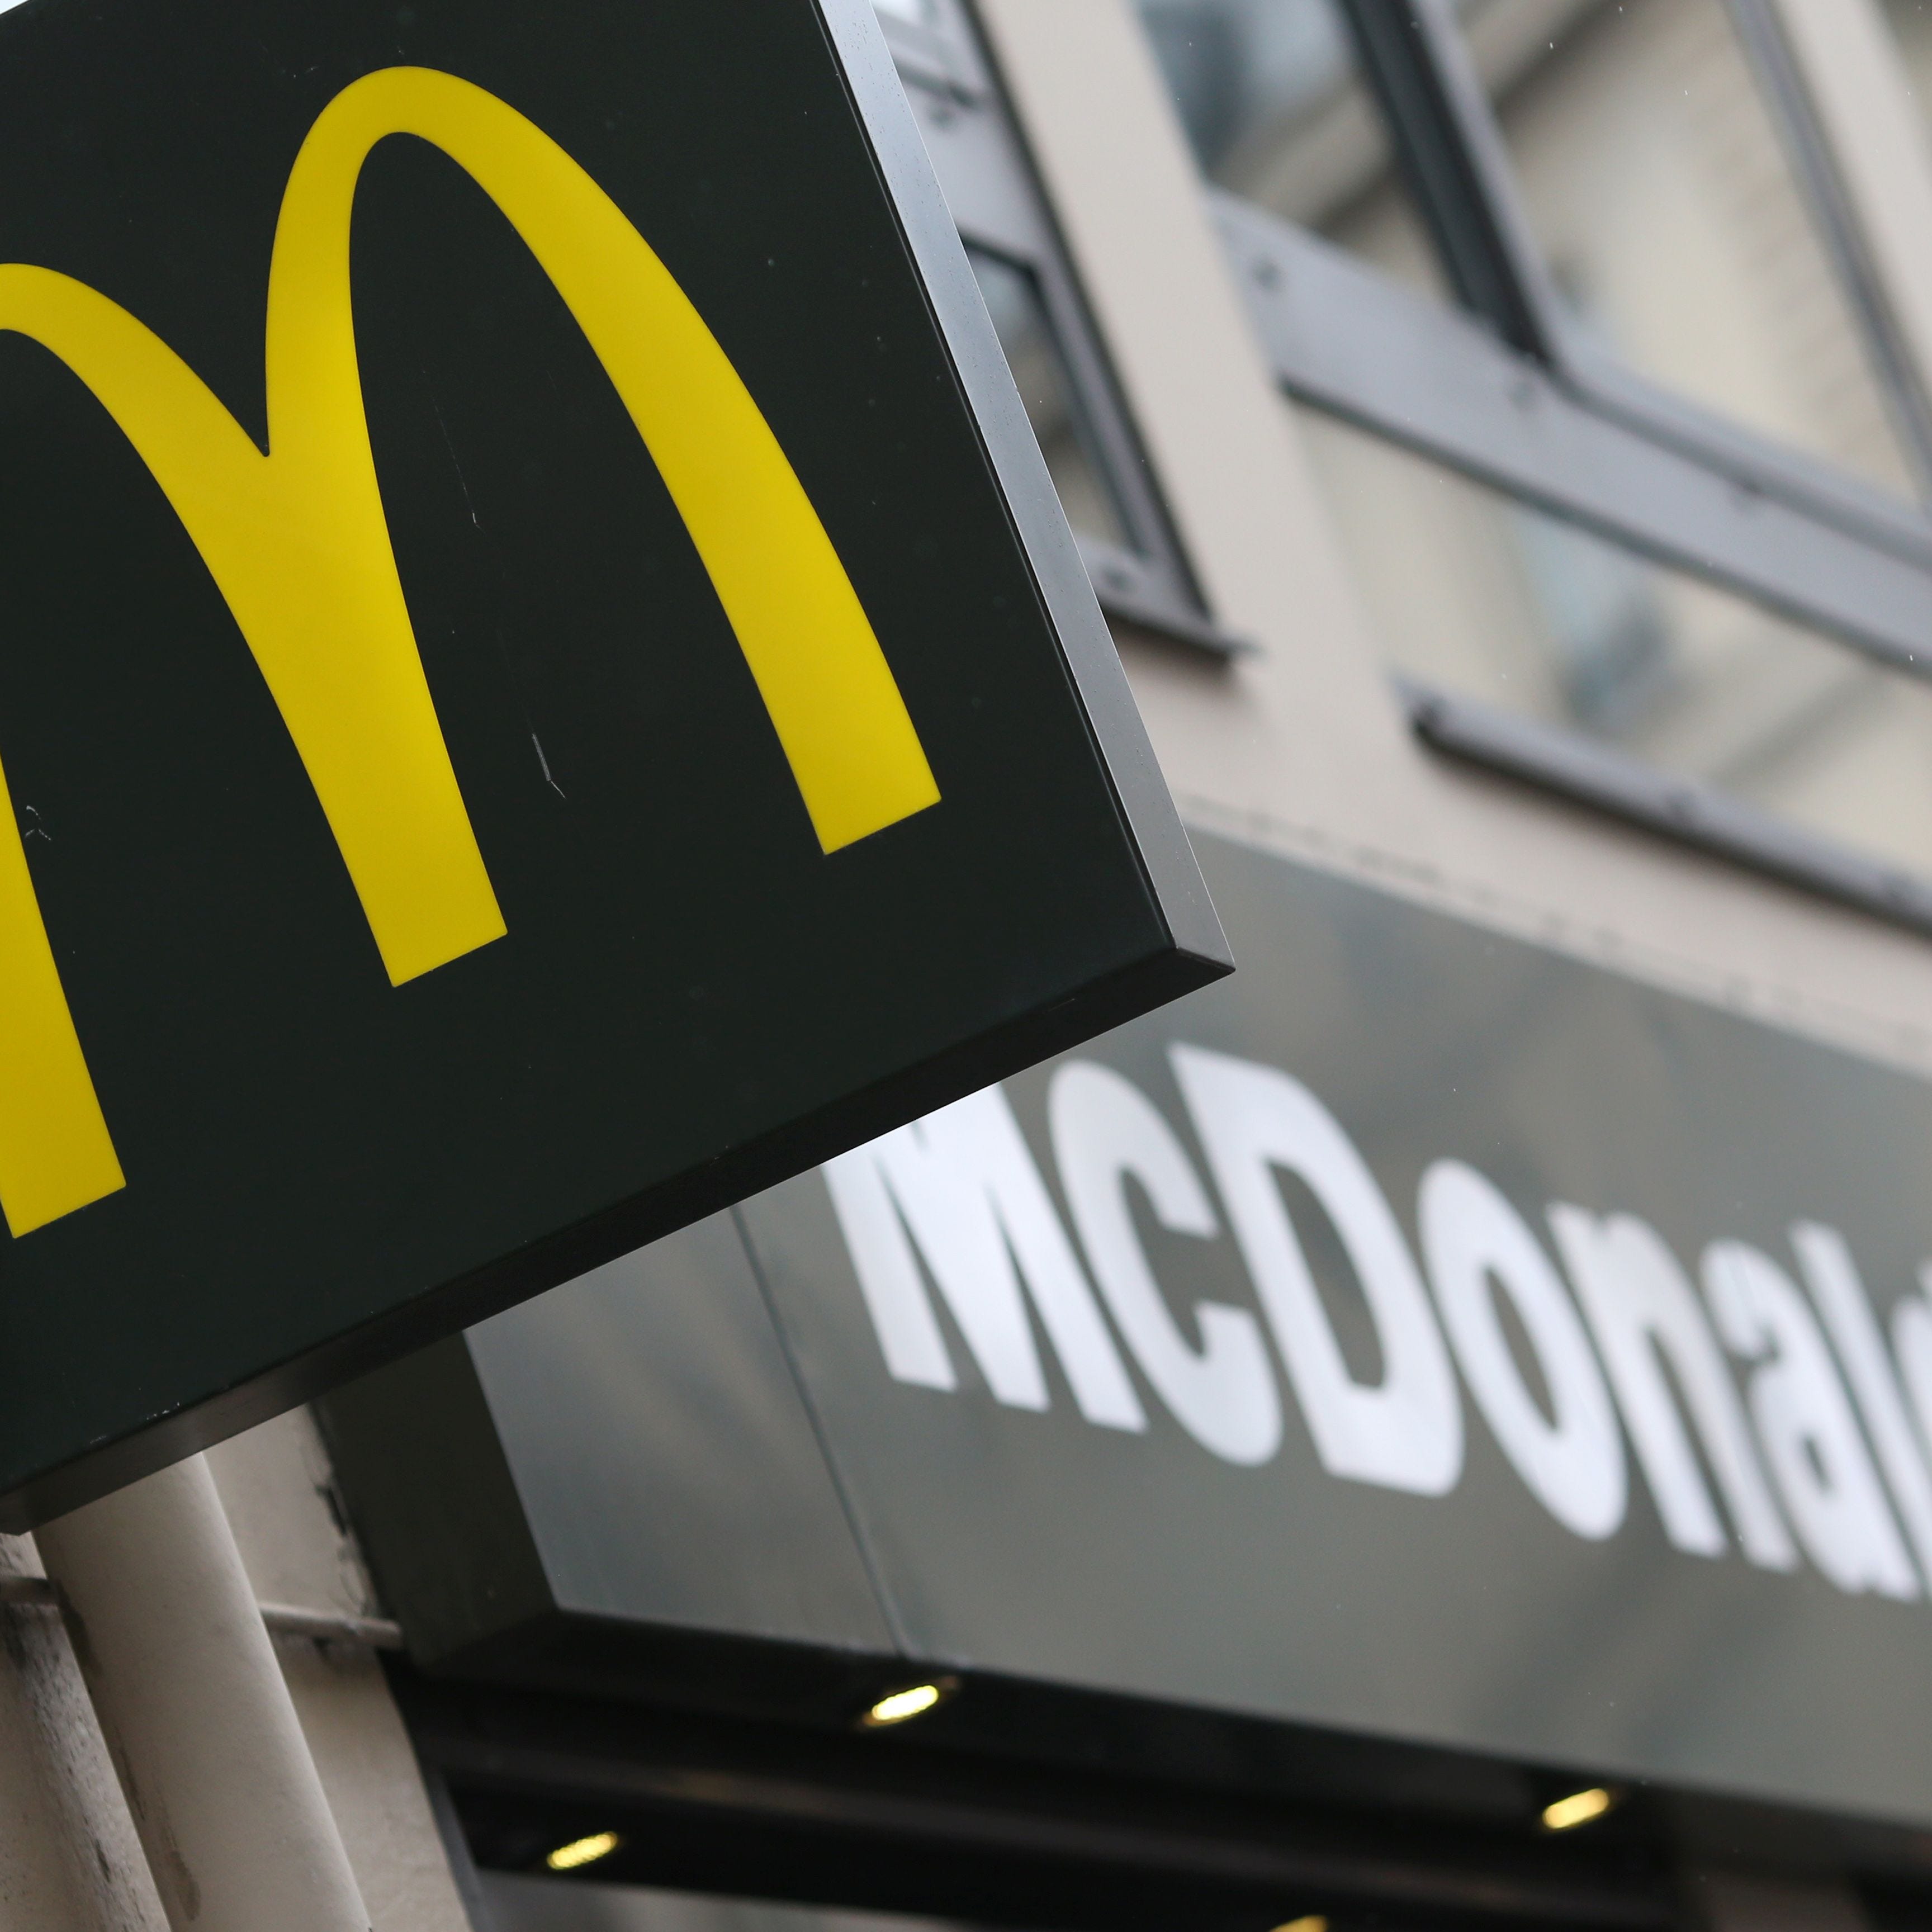 File photo taken in 2014 shows the logo of a U.S. fast food giant McDonald's at a company location in Paris, France.